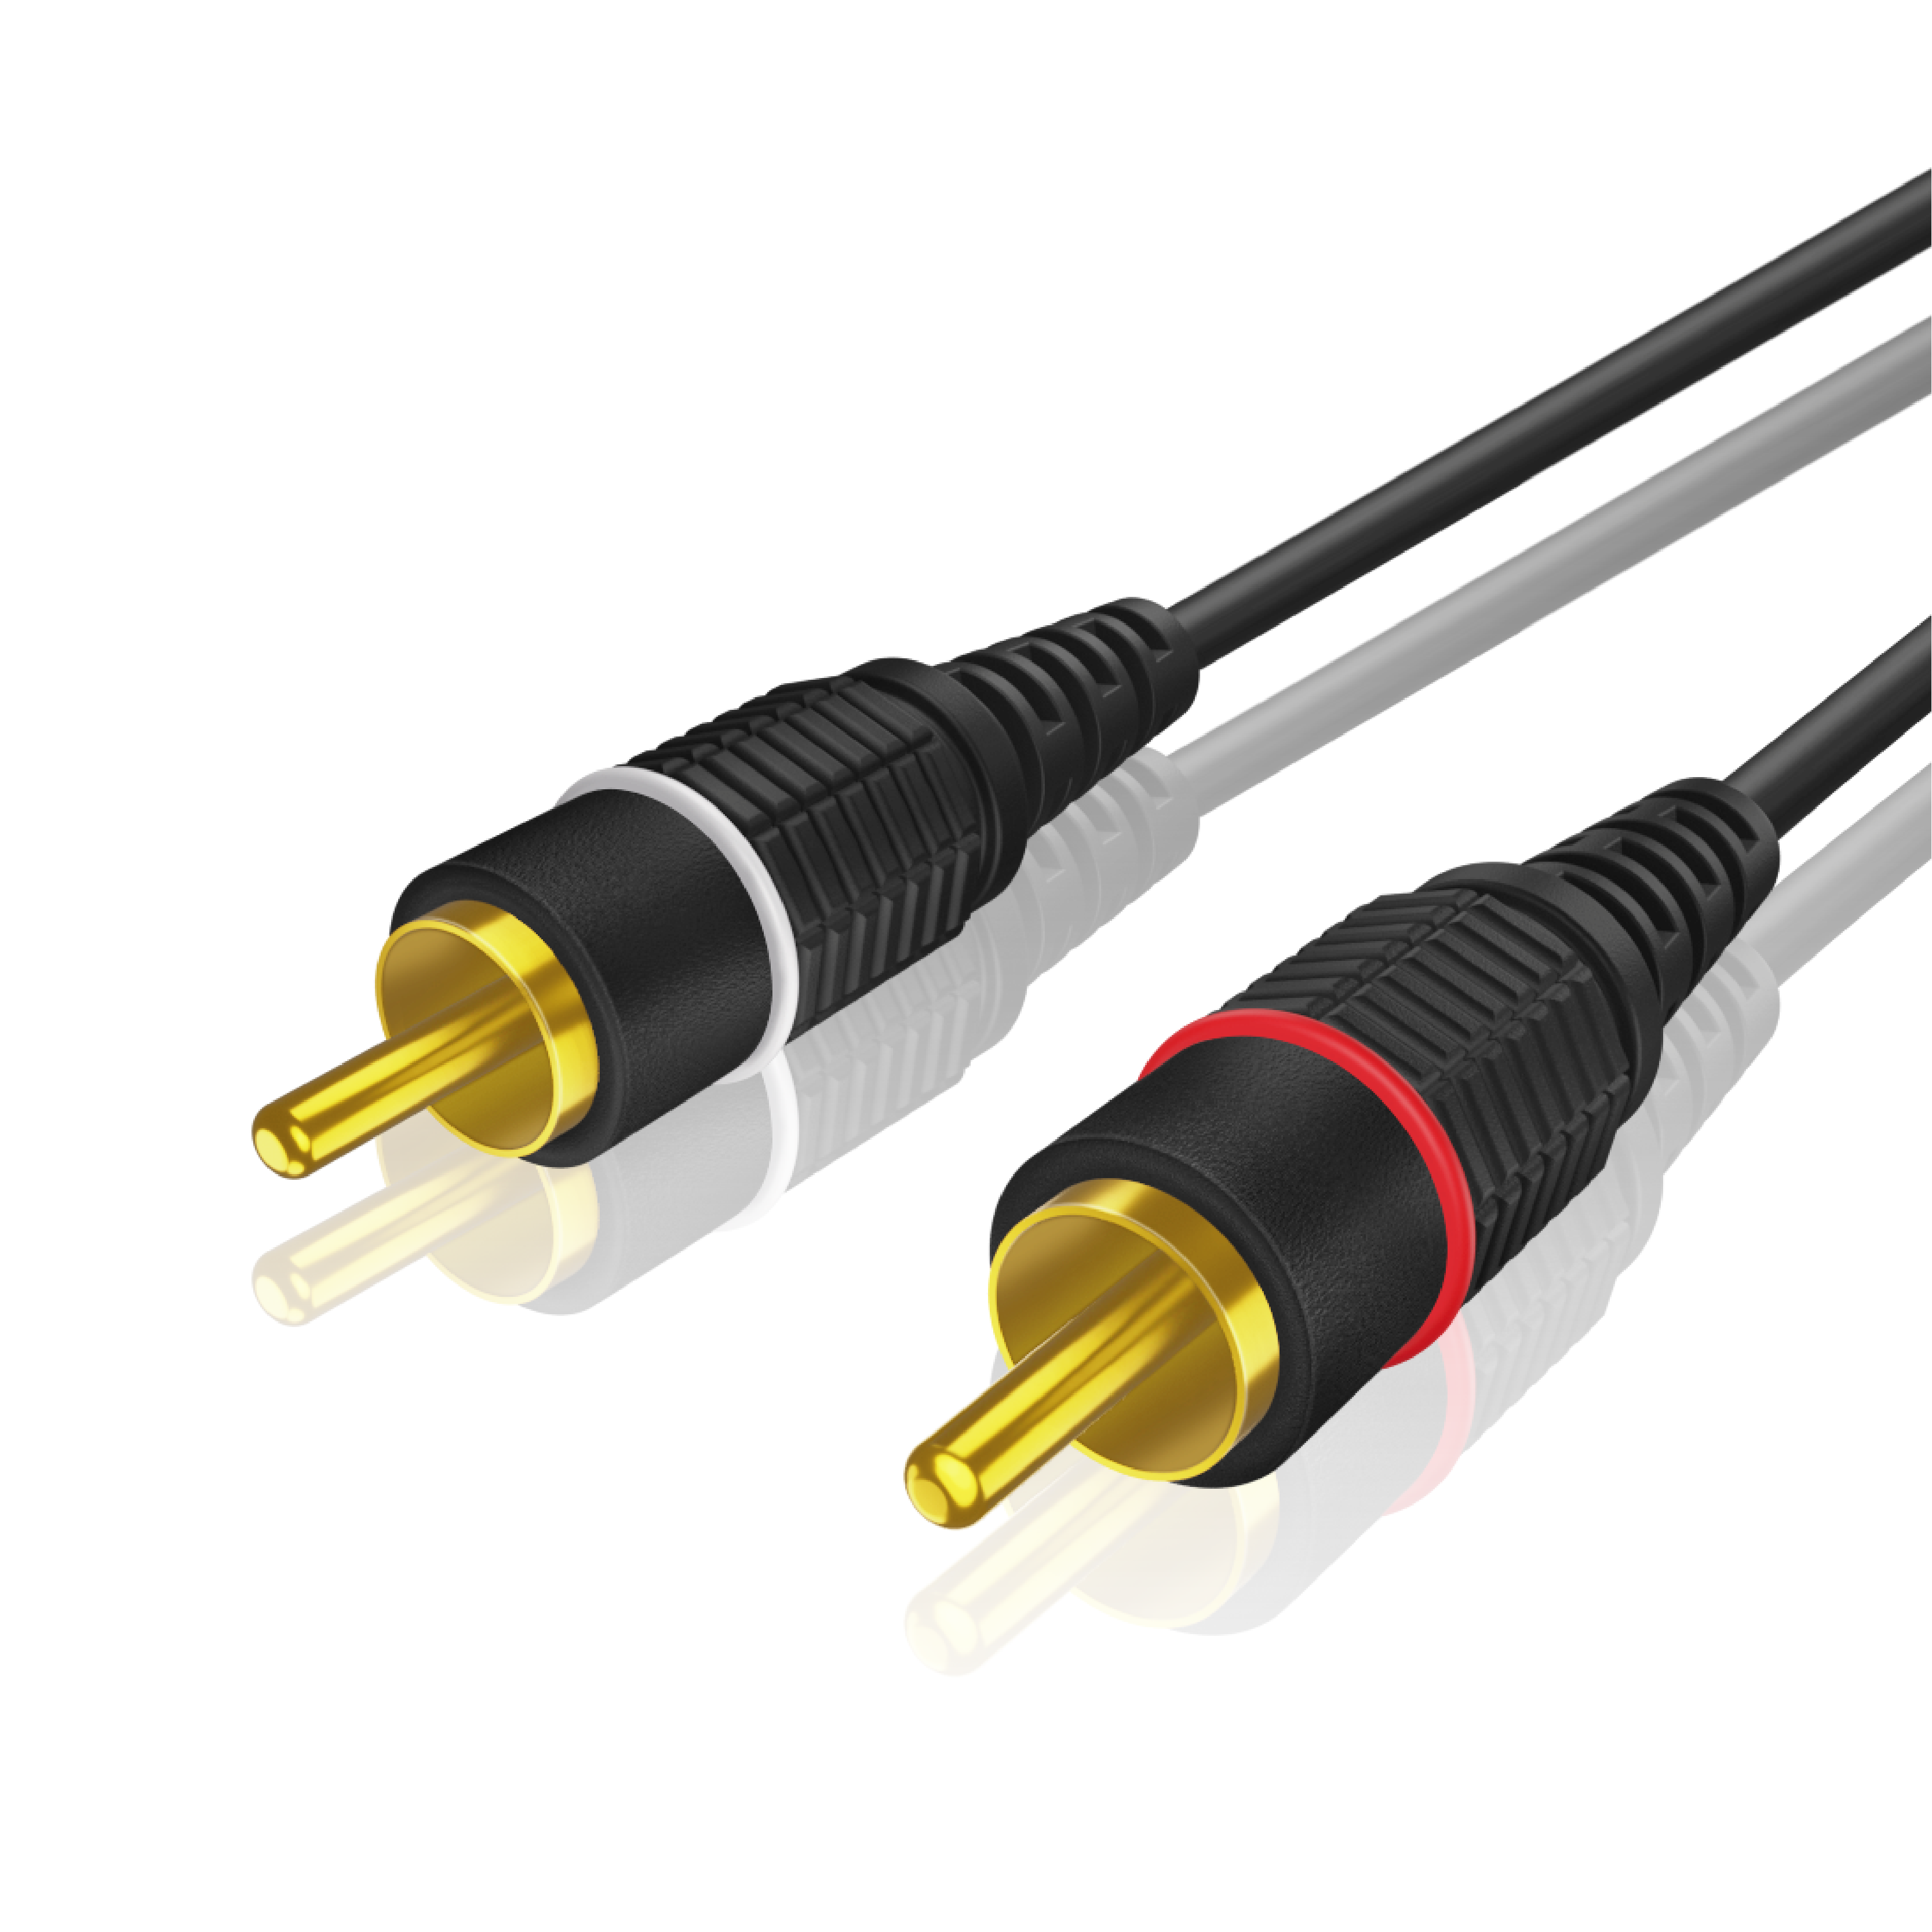 2RCA Stereo Audio Cable (25 Feet) - Dual RCA Plug M/M 2 Channel (Right and Left) Gold Plated Dual Shielded RCA to RCA Male Connectors Black - image 1 of 6